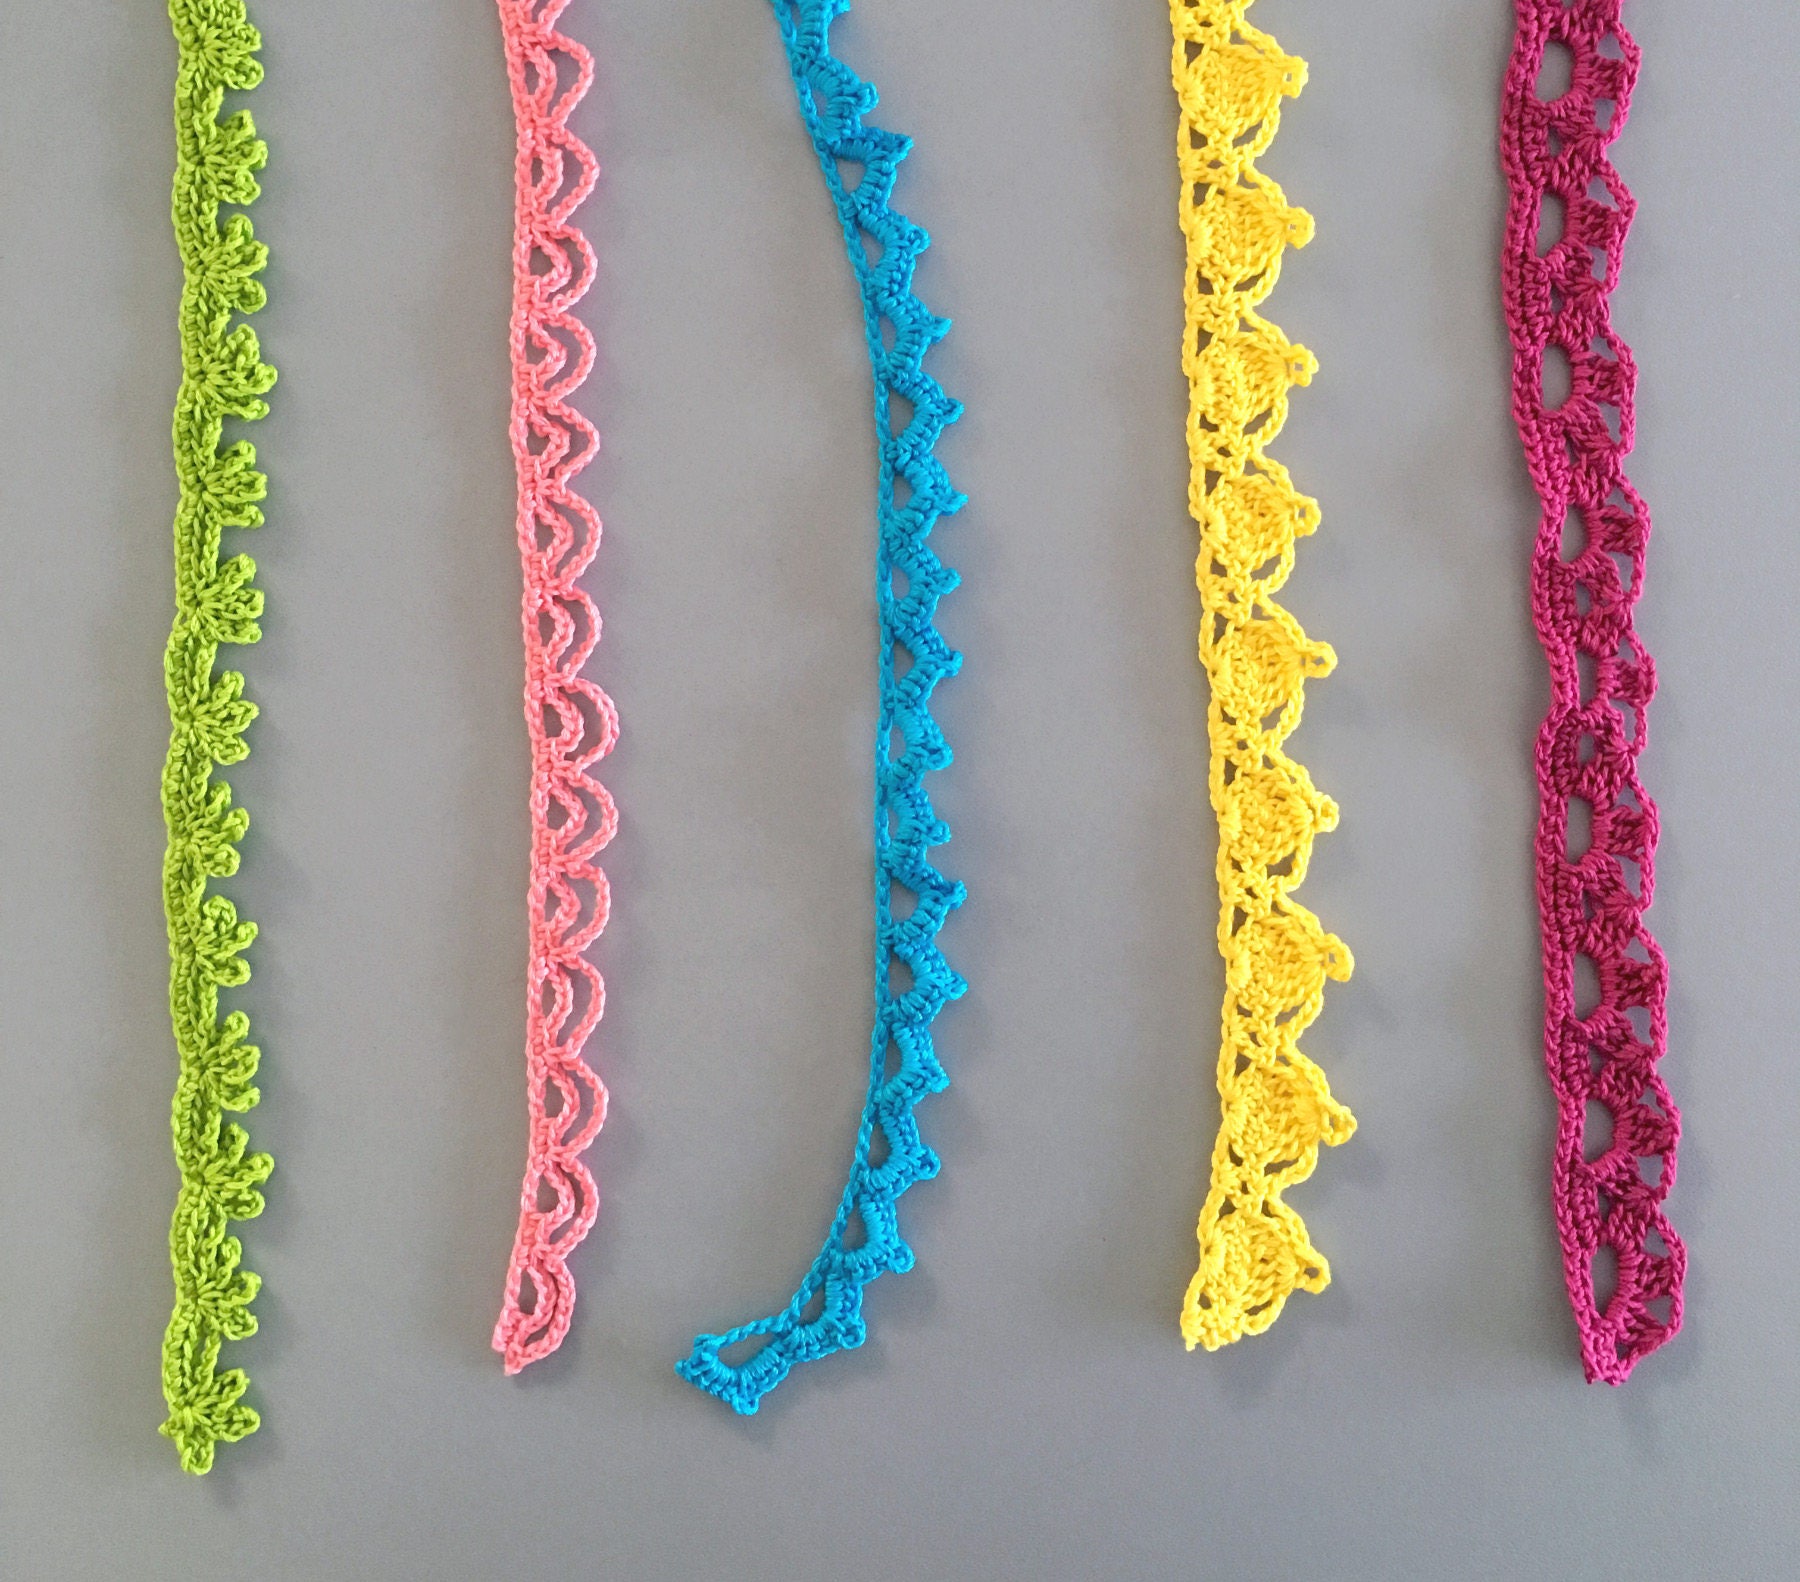 Crochet Decorative Trim / Edging Available in Assorted Styles Your